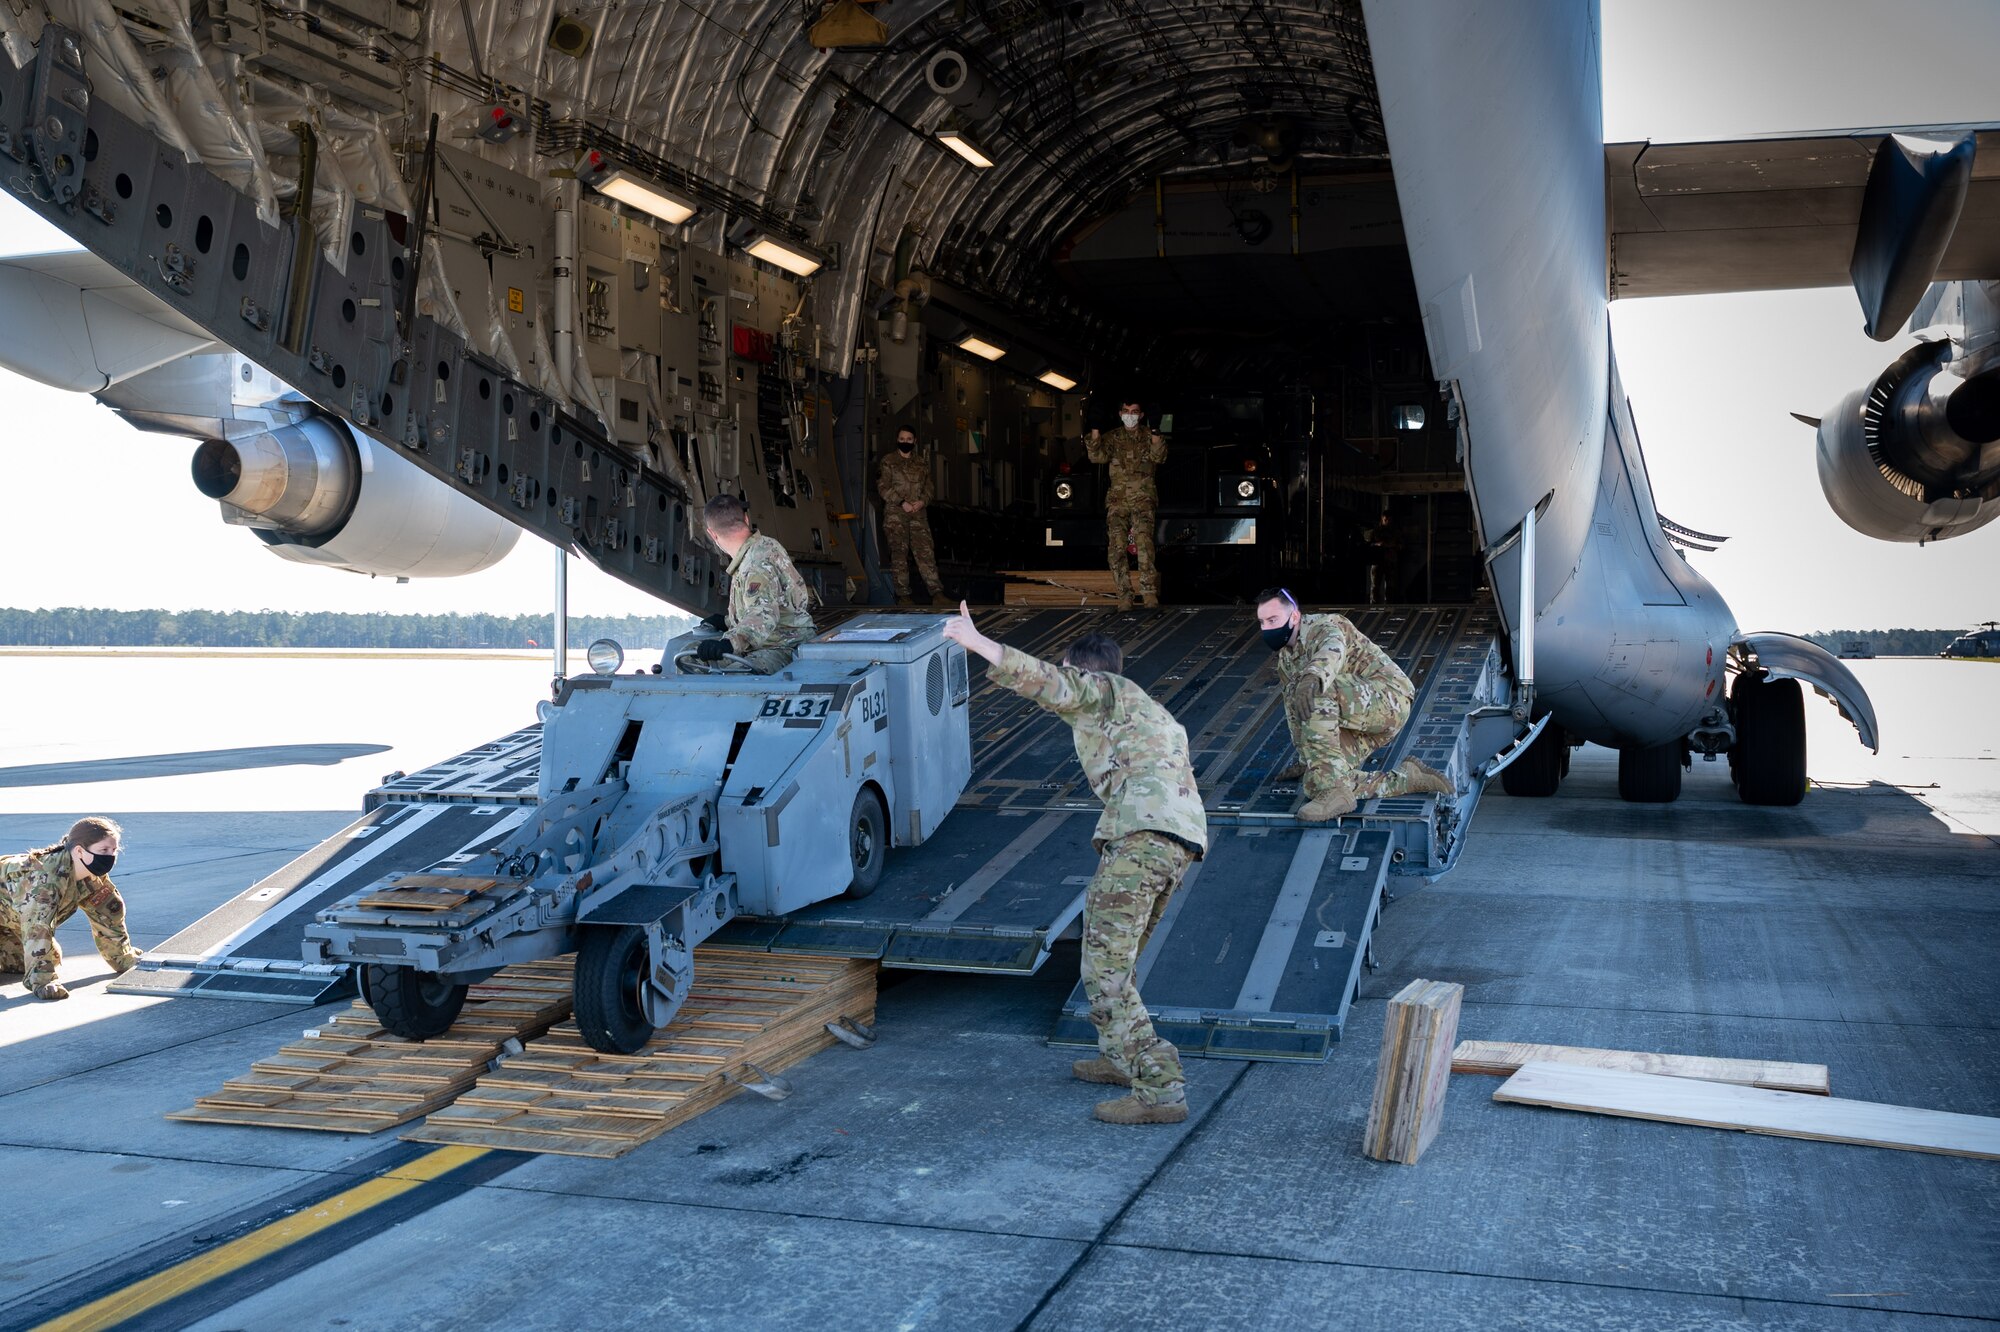 Airmen from Dover Air Force Base marshal a bomb loading cart onto a Dover AFB C-17 Globemaster III during exercise Mosaic Tiger at Moody AFB, Georgia, Feb. 23, 2021. Mobility Airmen from Dover AFB and Joint Base McGuire-Dix Lakehurst, New Jersey, participated in the exercise to enhance readiness and reinforce Air Mobility Command support to the joint warfighter. (U.S. Air Force photo by Airman 1st Class Faith Schaefer)